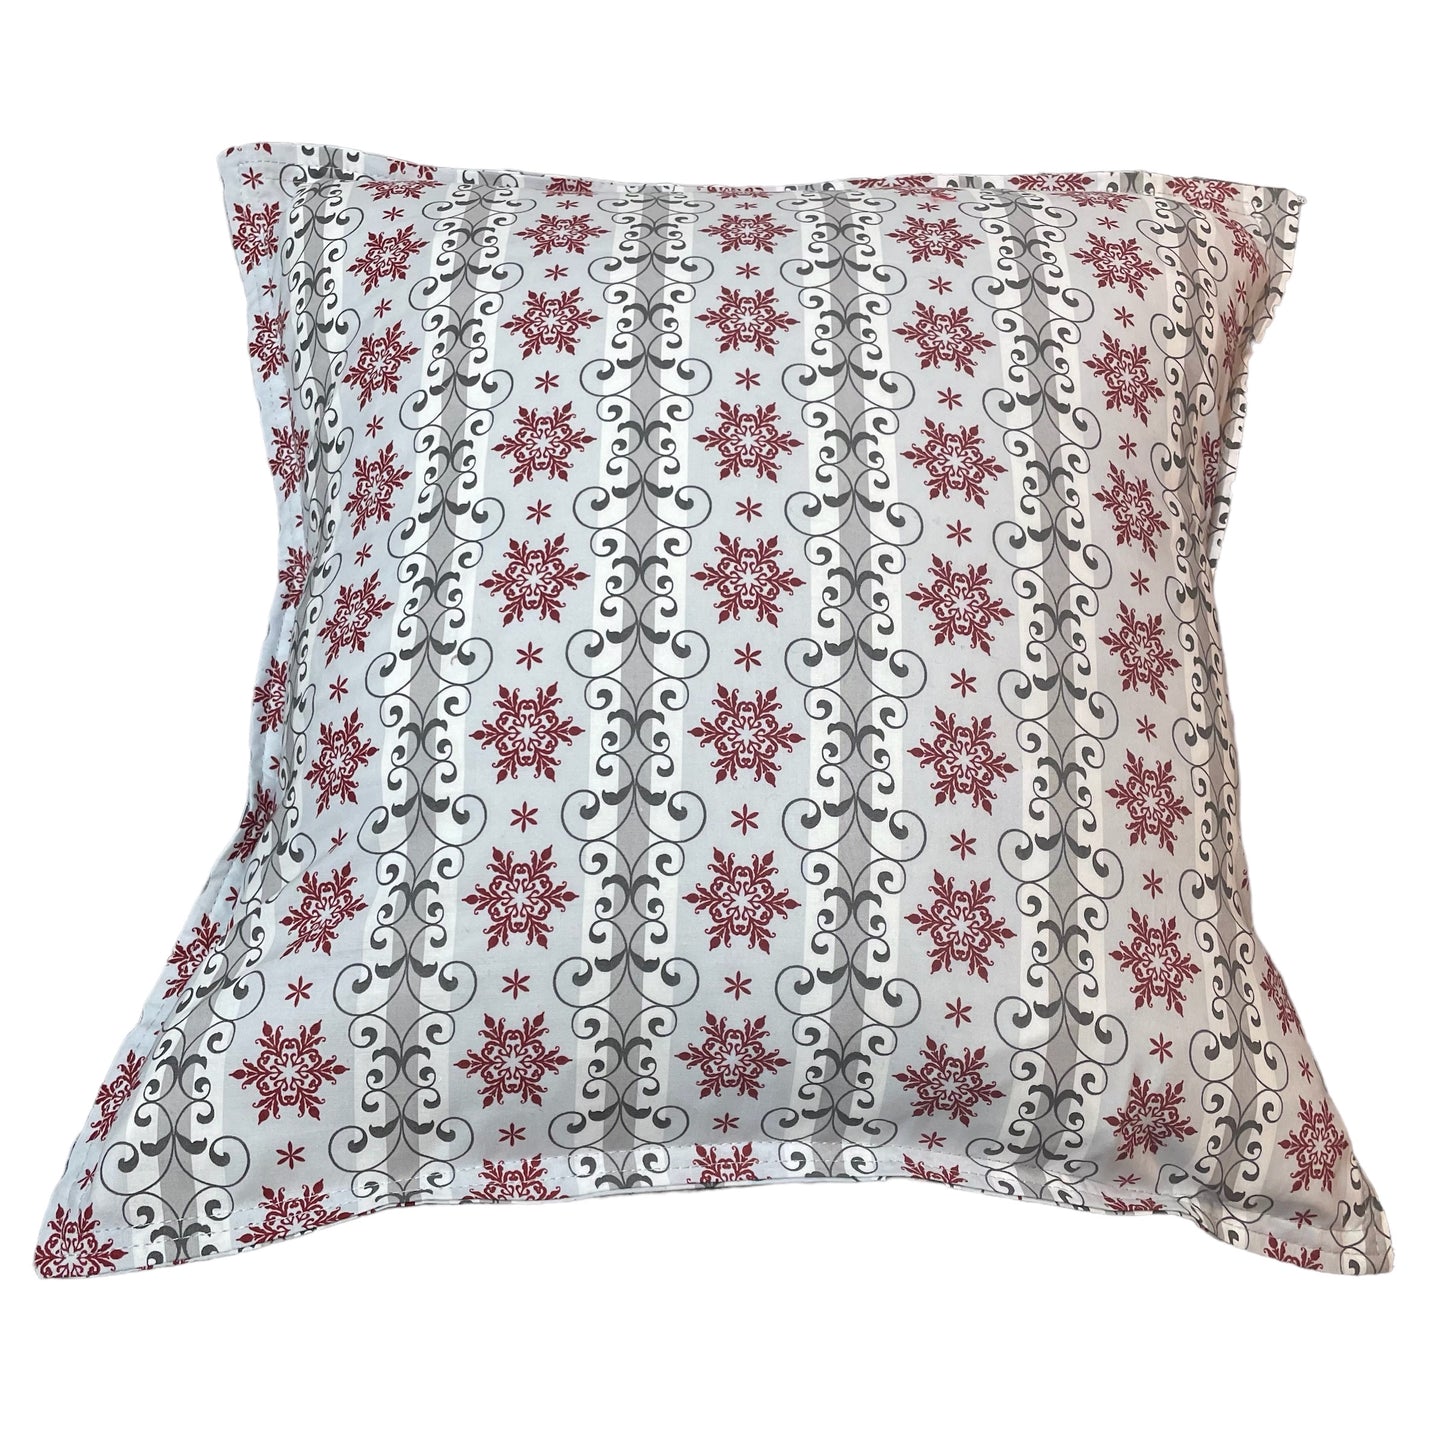 Red and Grey Snowflake Pillow Sham - Insert Sold Separately